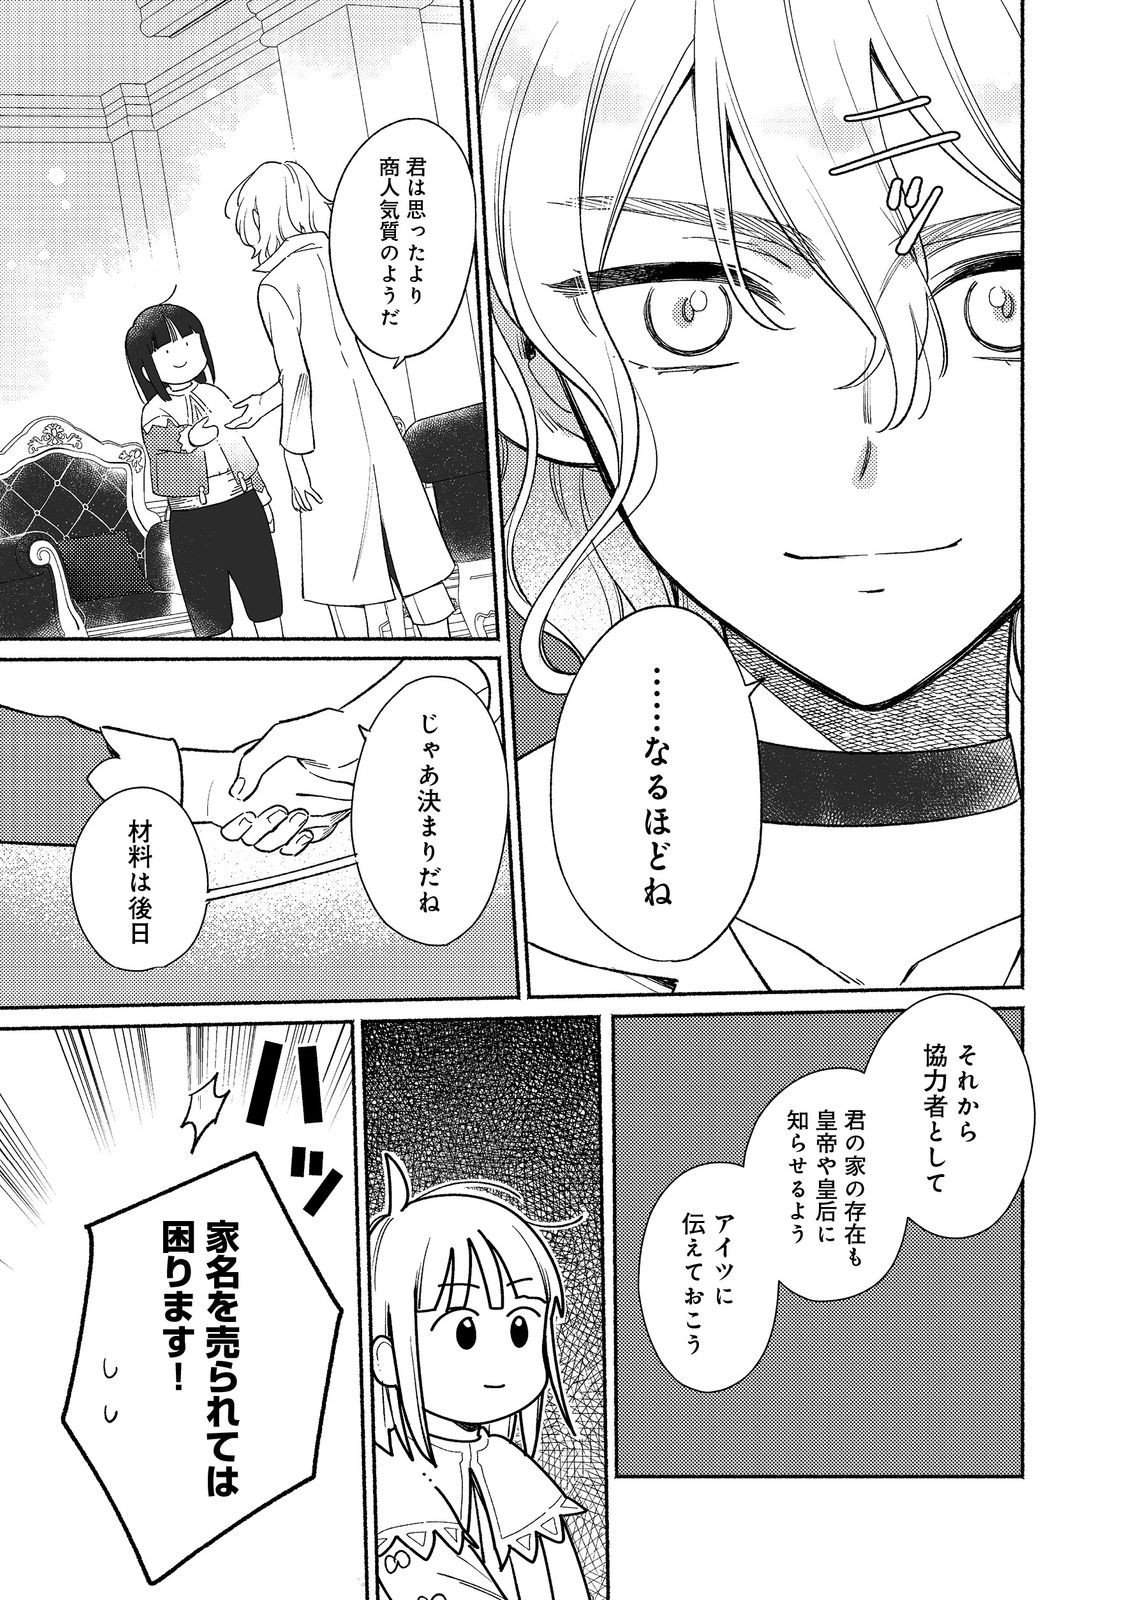 I’m the White Pig Nobleman 第19.2話 - Page 7